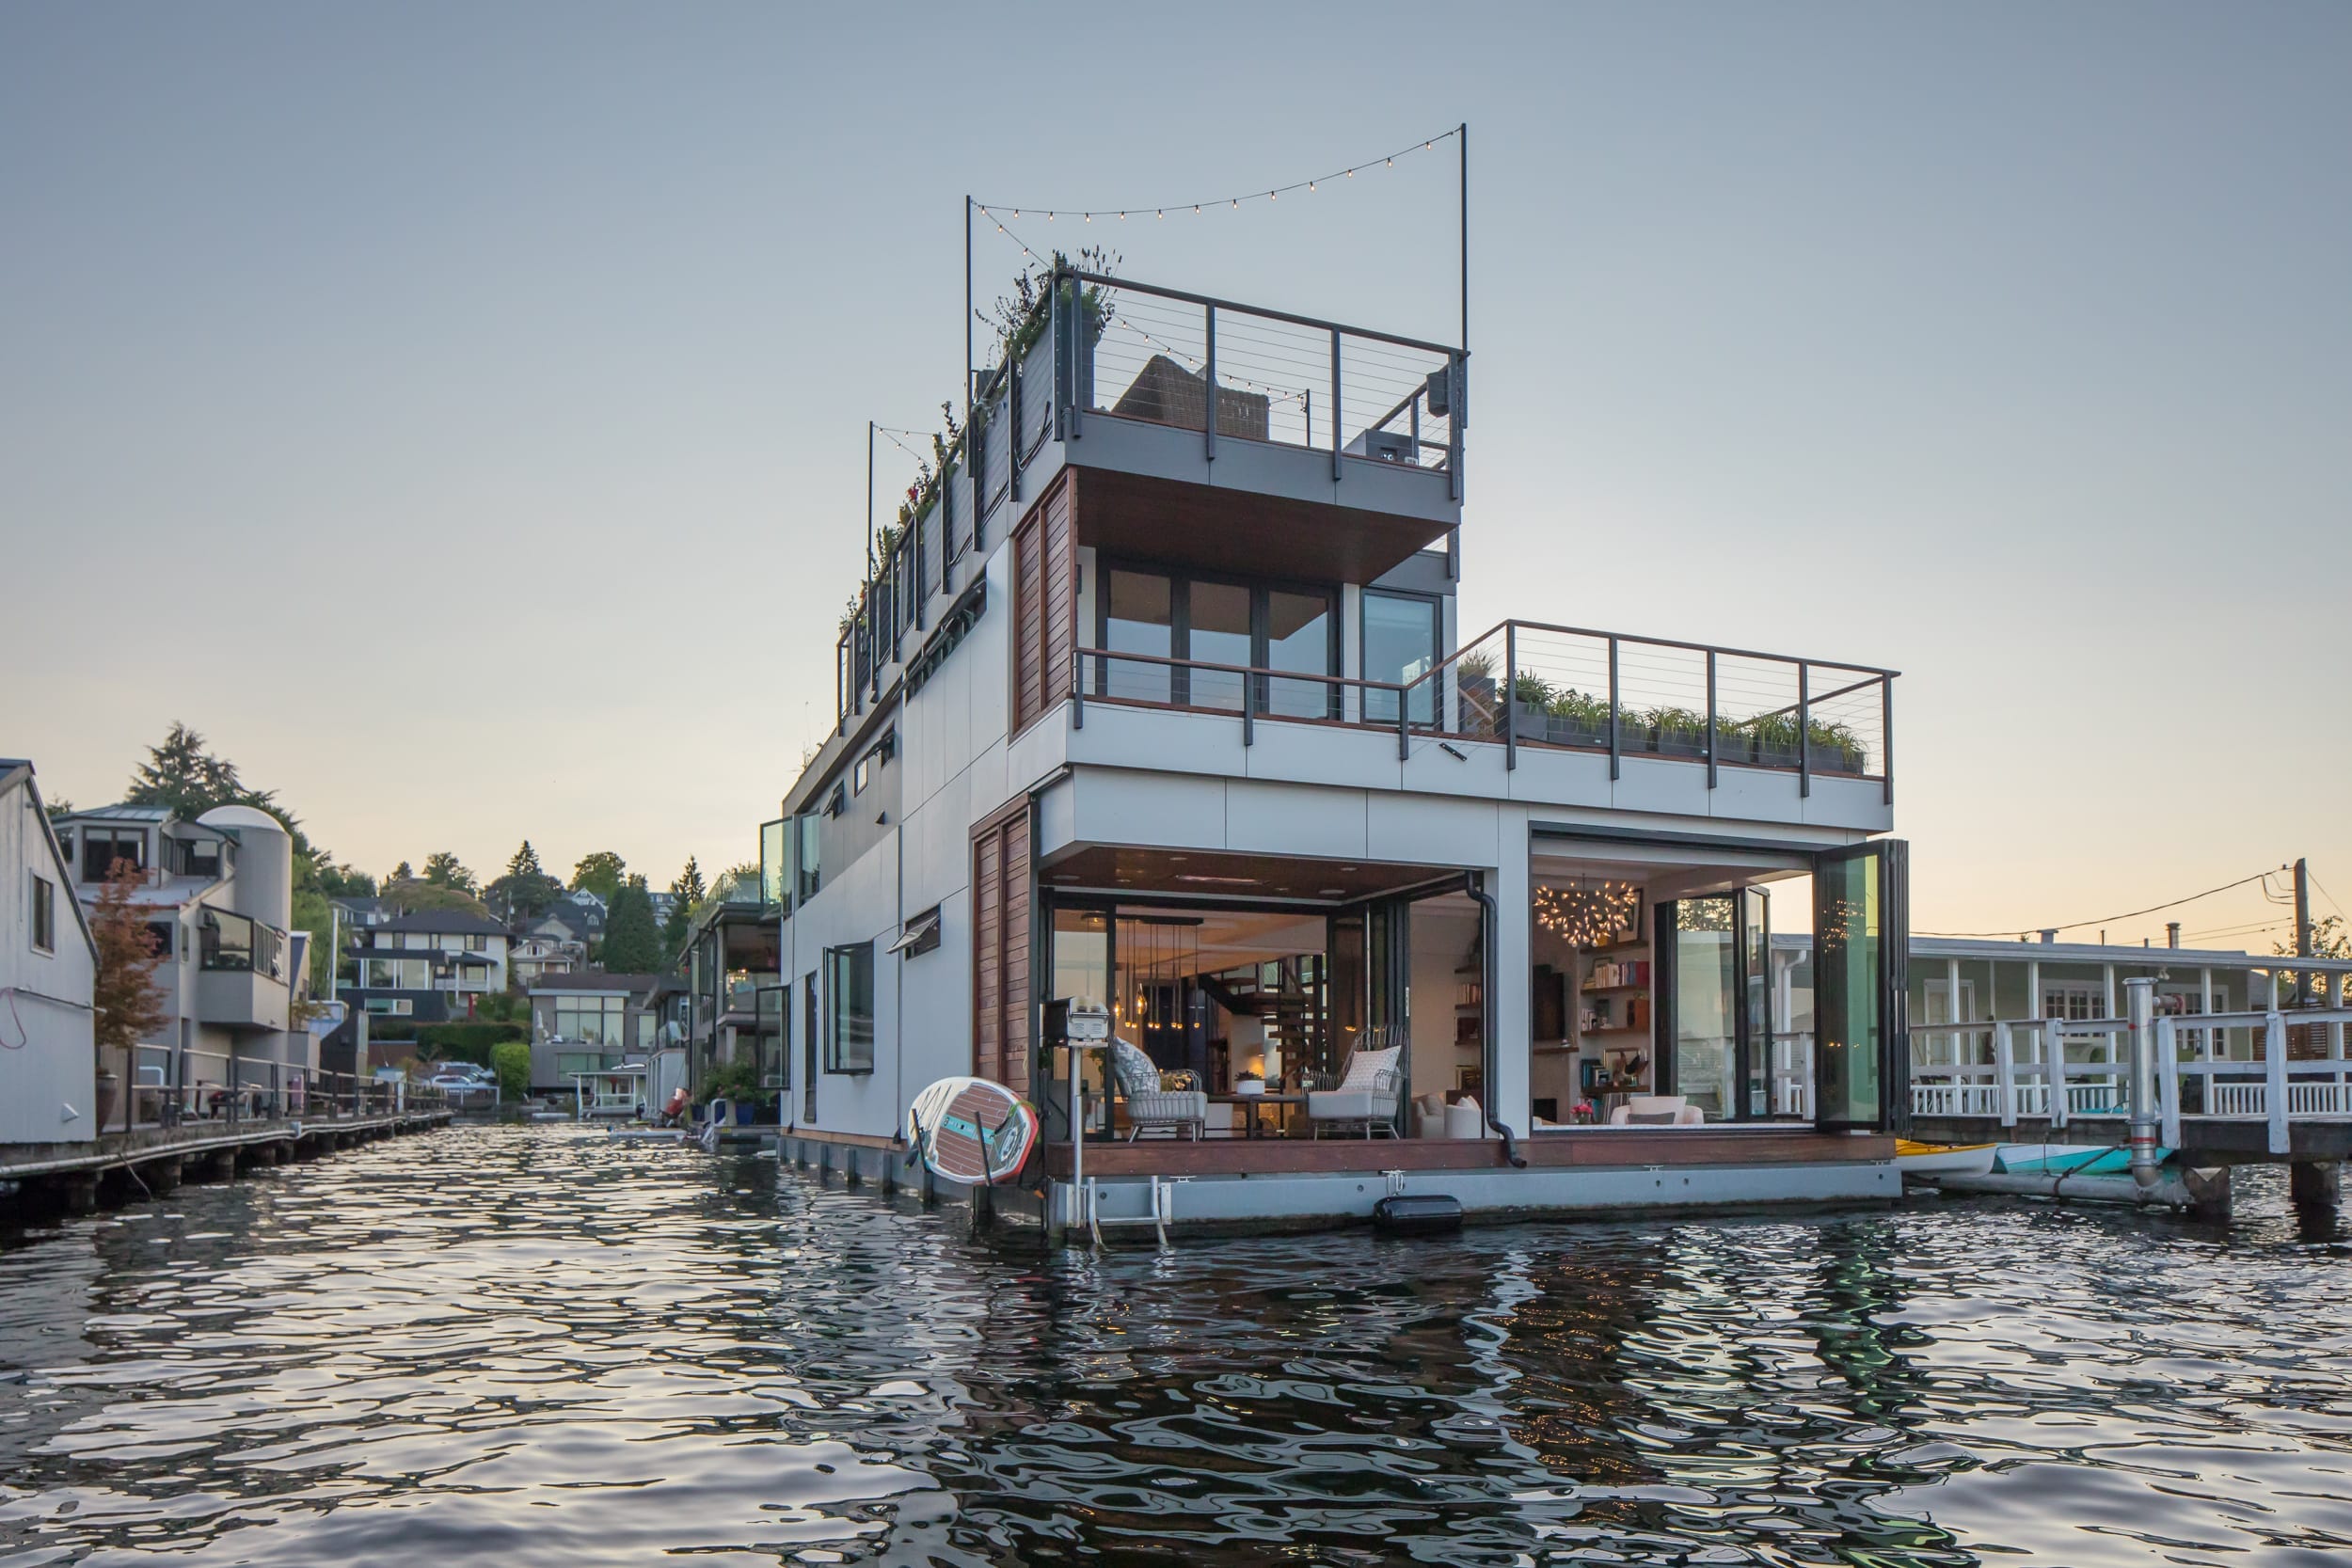 A floating home on a boat in the water.